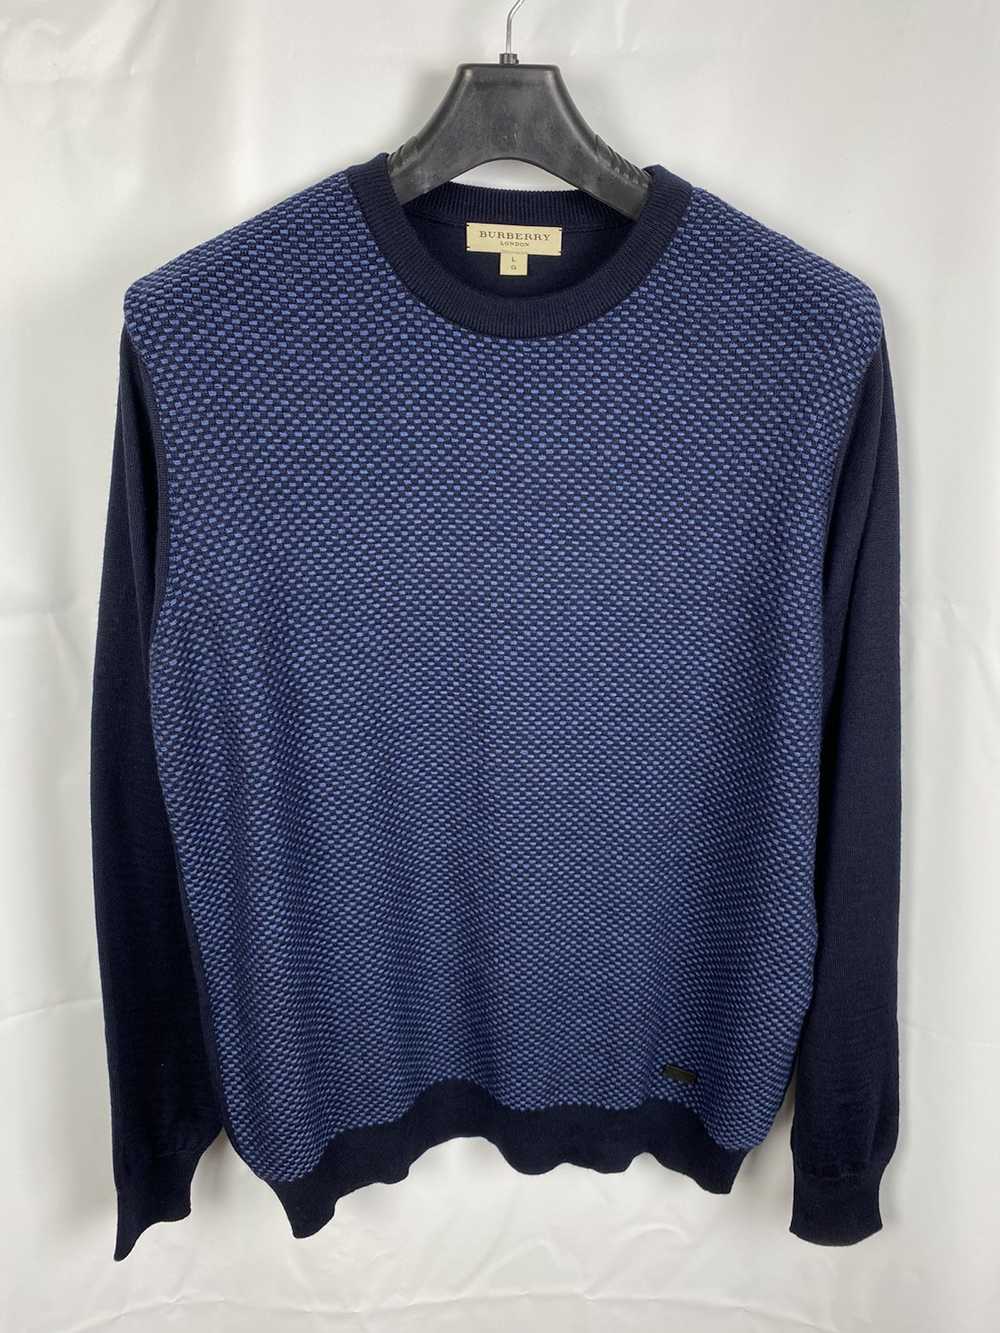 Burberry Burberry London Wool Knit Blue Sweater s… - image 1